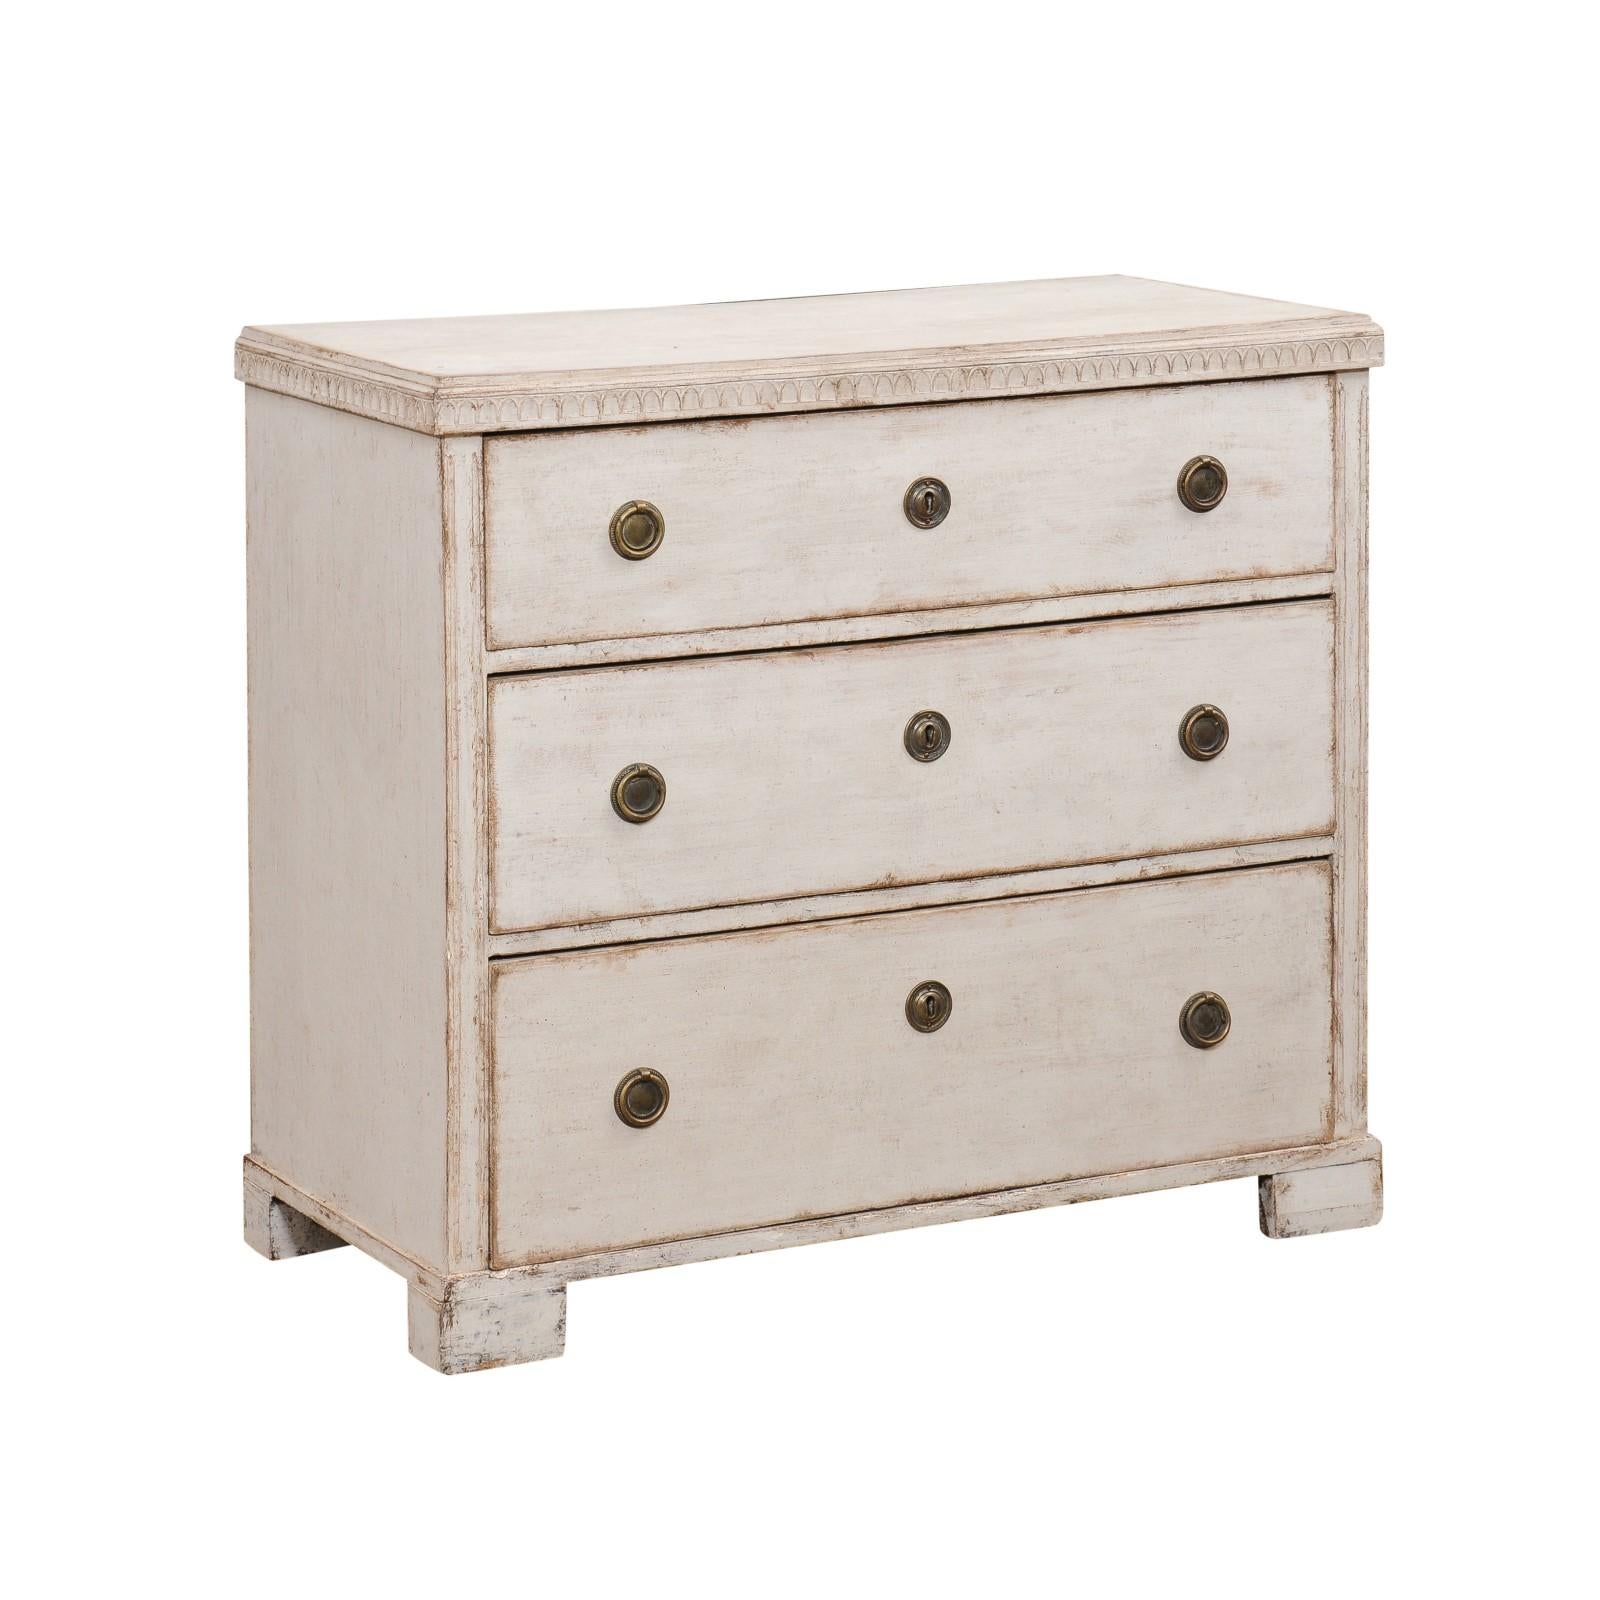 A Swedish Gustavian Style painted wood chest from the Mid-19th Century, with three graduated drawers, carved motifs, block feet and Classical brass hardware. Created in Sweden during the 1850s, this painted chest showcases the stylistic